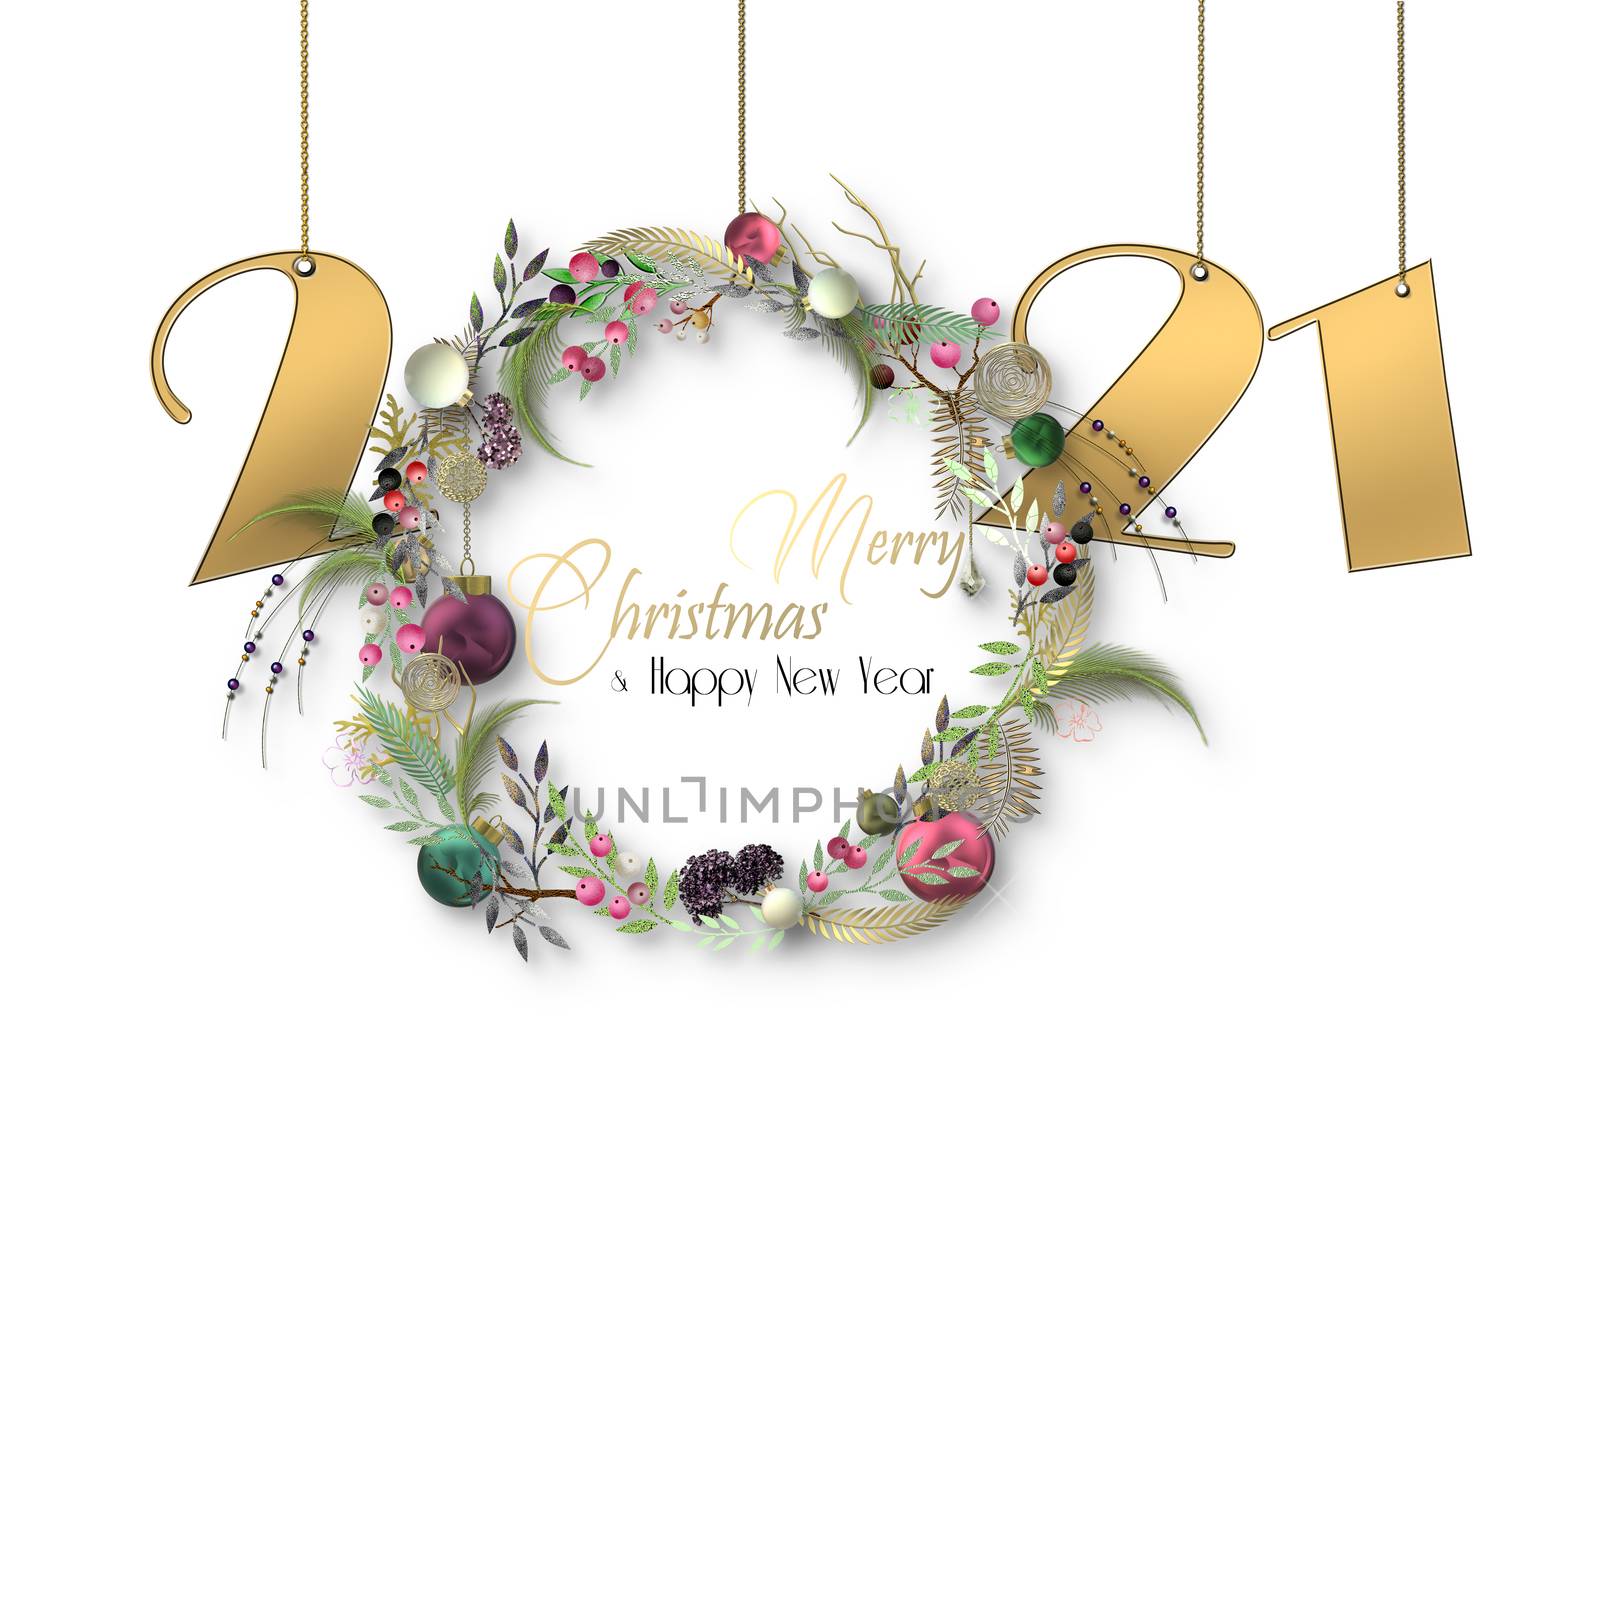 Holiday new year background over white by NelliPolk